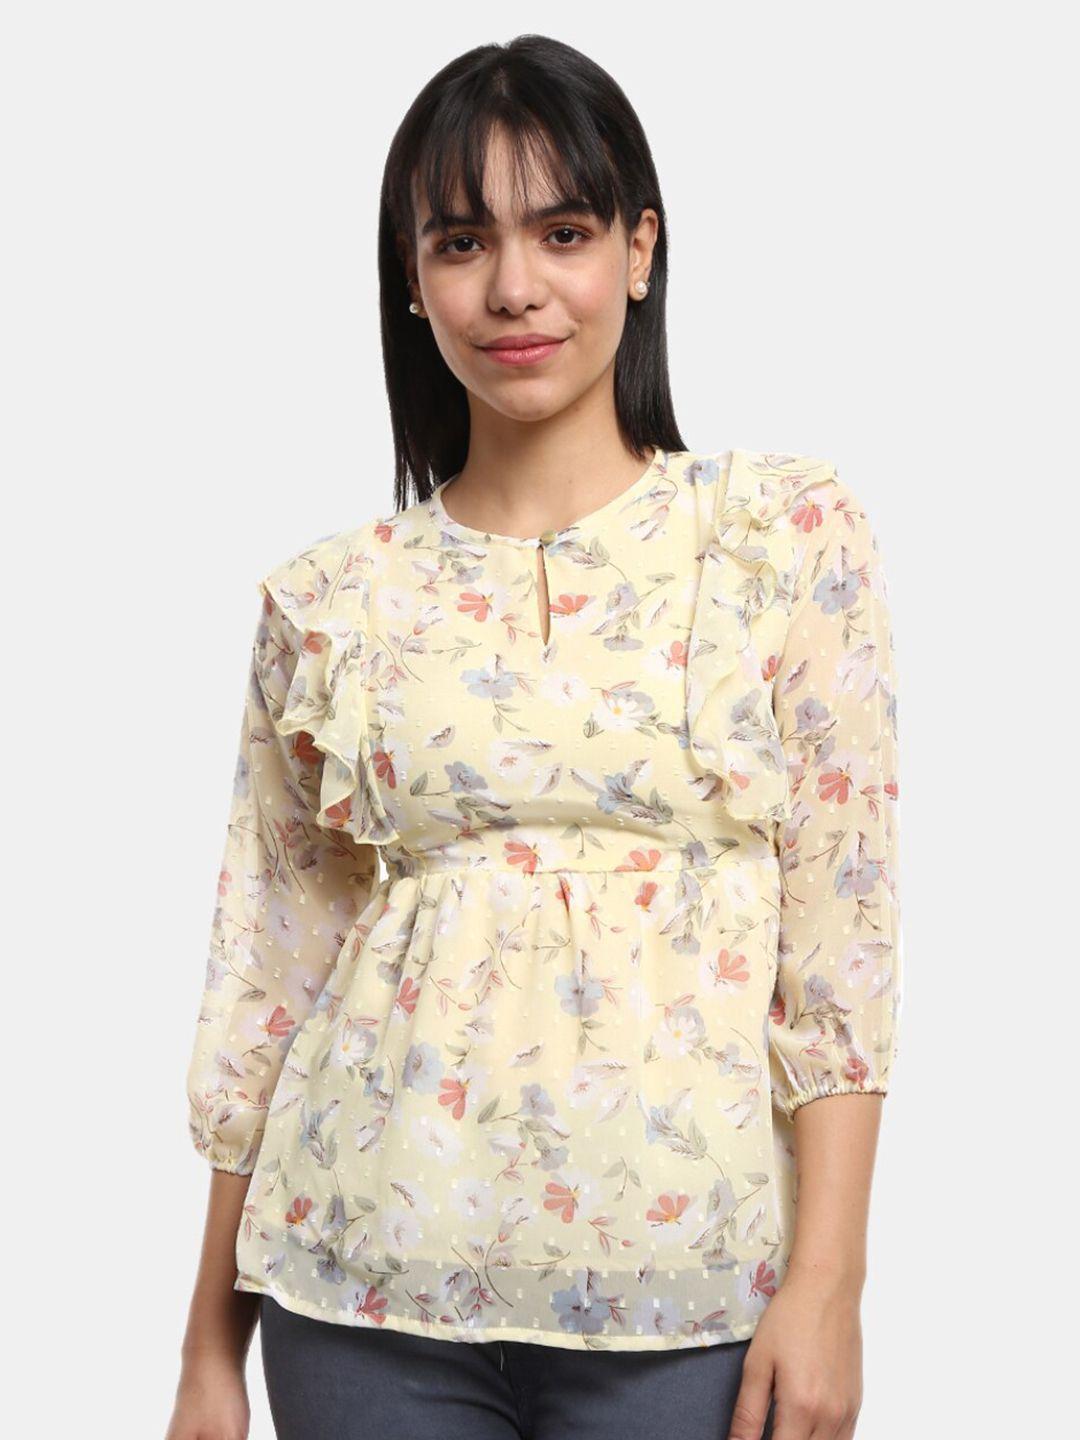 v-mart-yellow-floral-print-keyhole-neck-georgette-empire-top